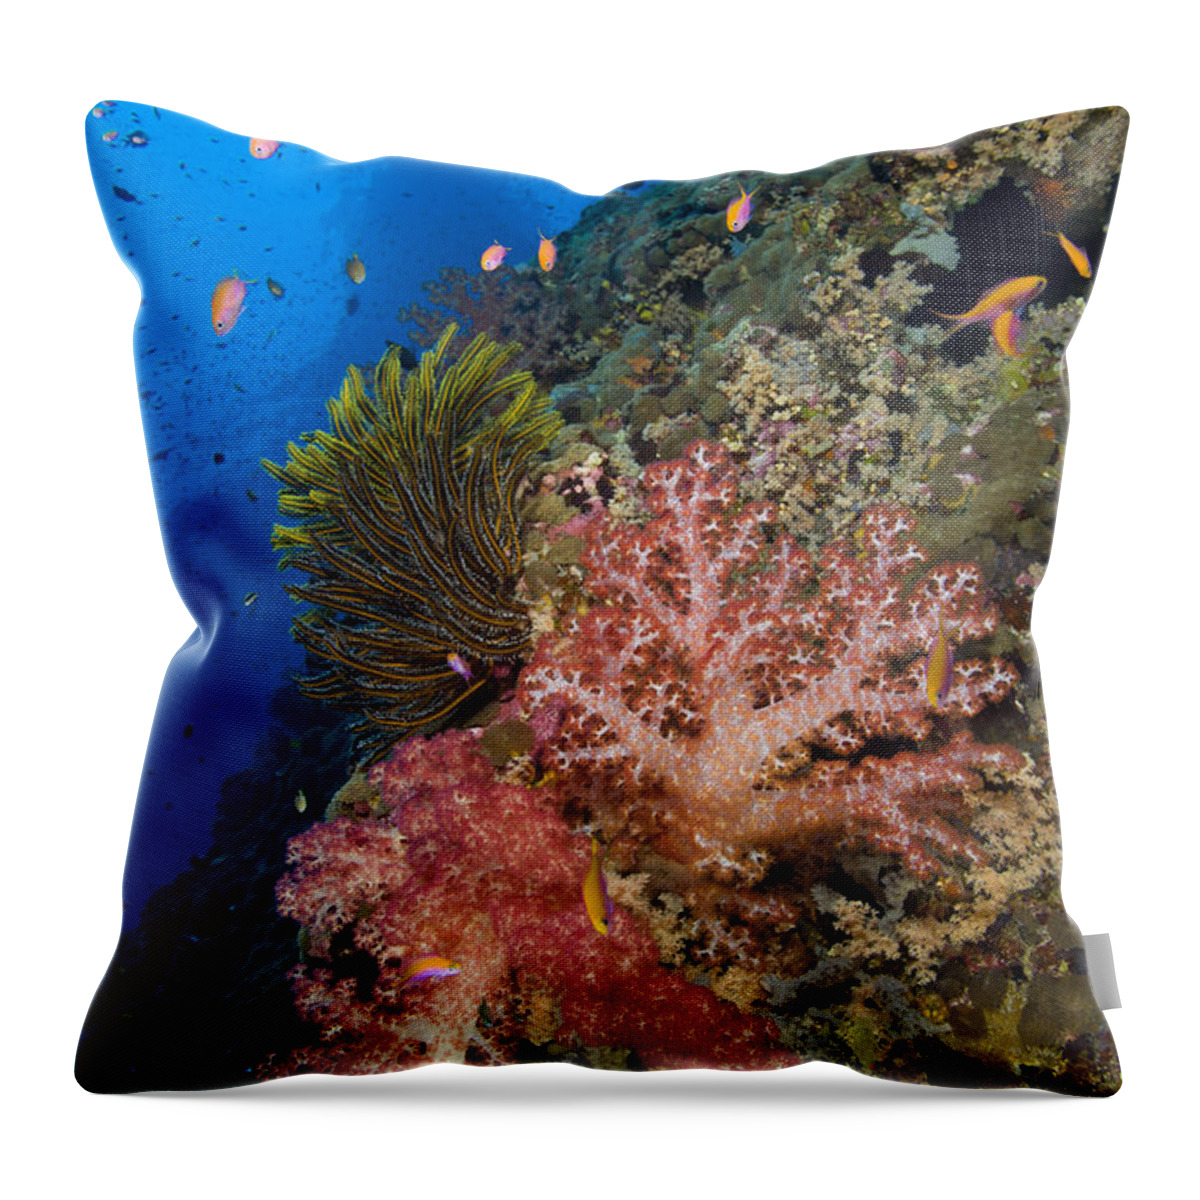 Anthozoa Throw Pillow featuring the photograph Red Soft Coral With Crinoid And Anthias by Steve Jones